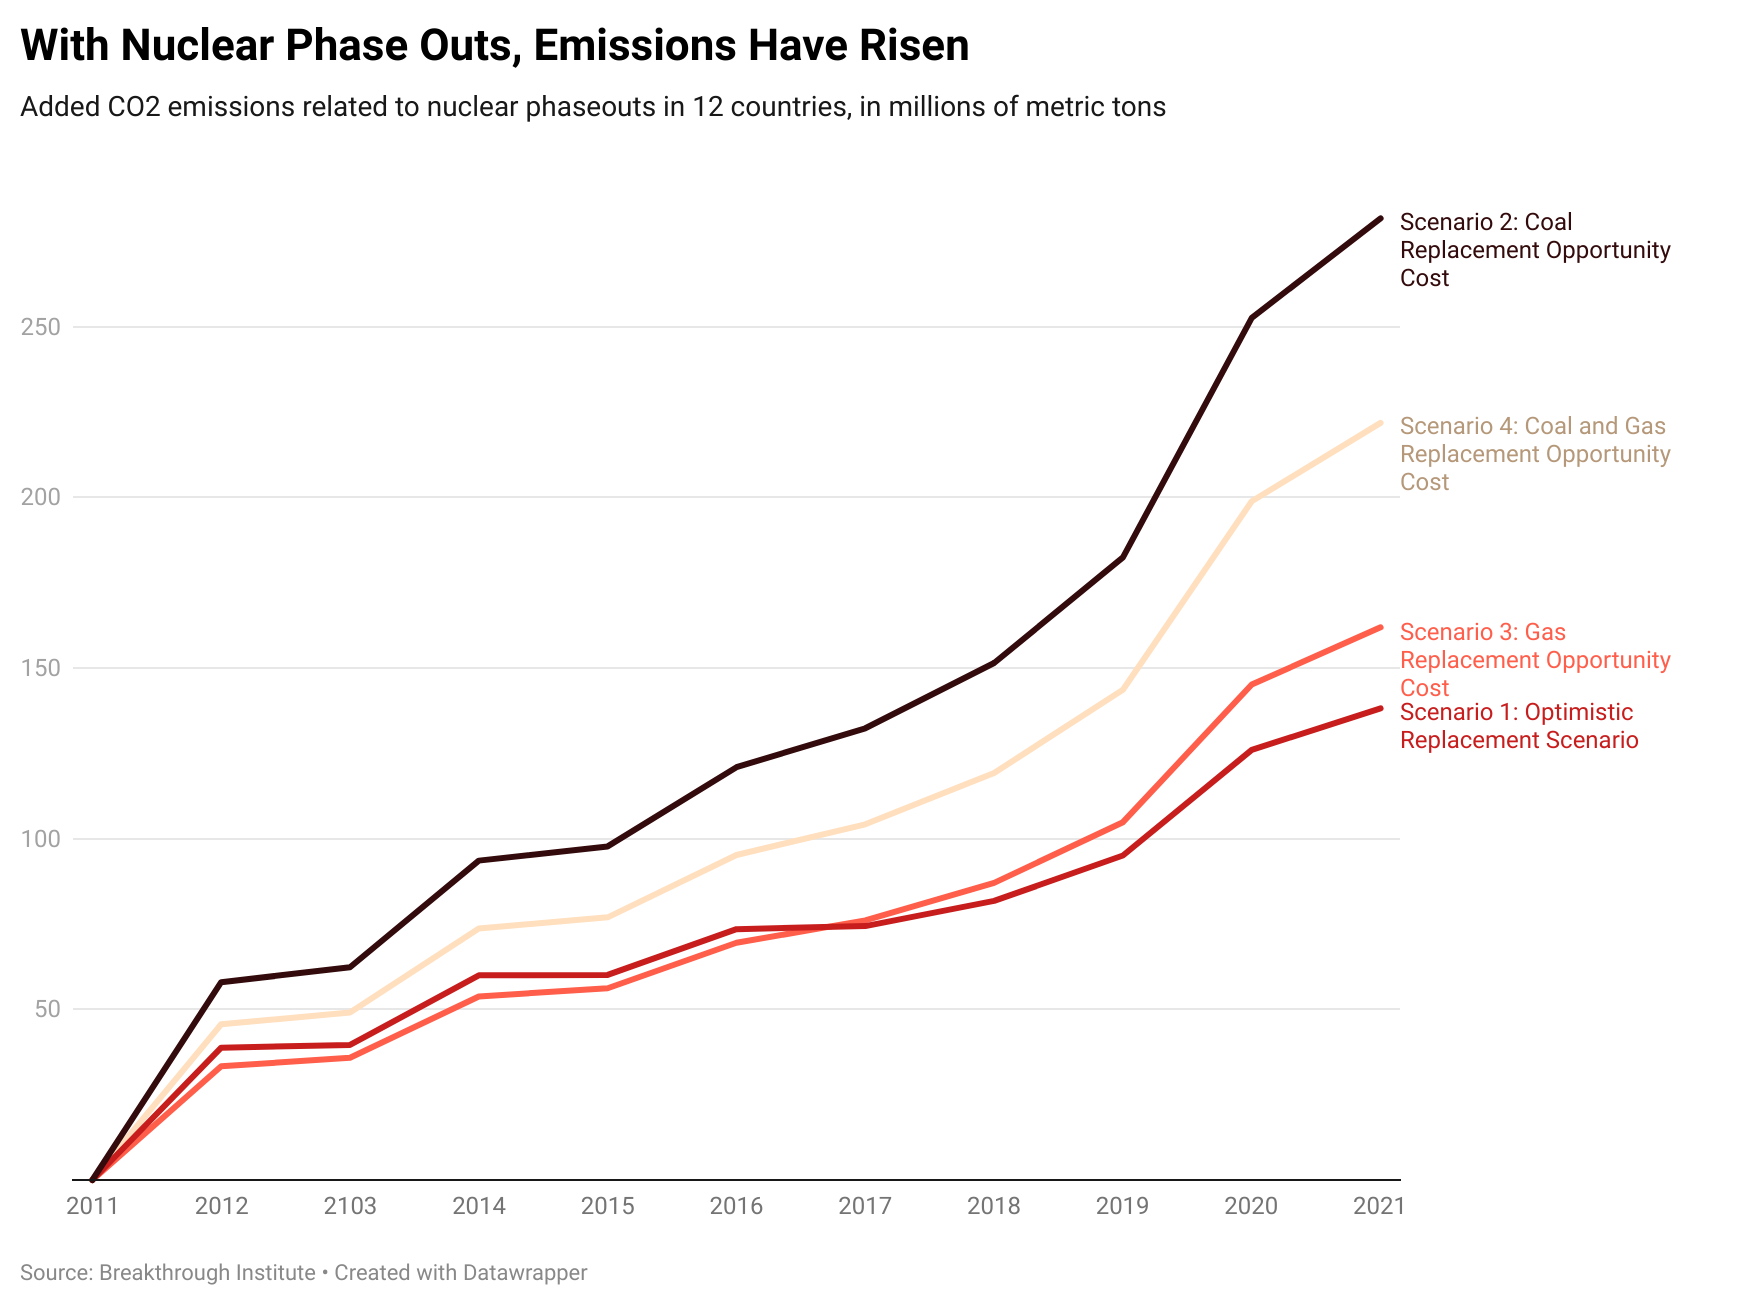 With Nuclear Phase Outs, Emissions Have Risen